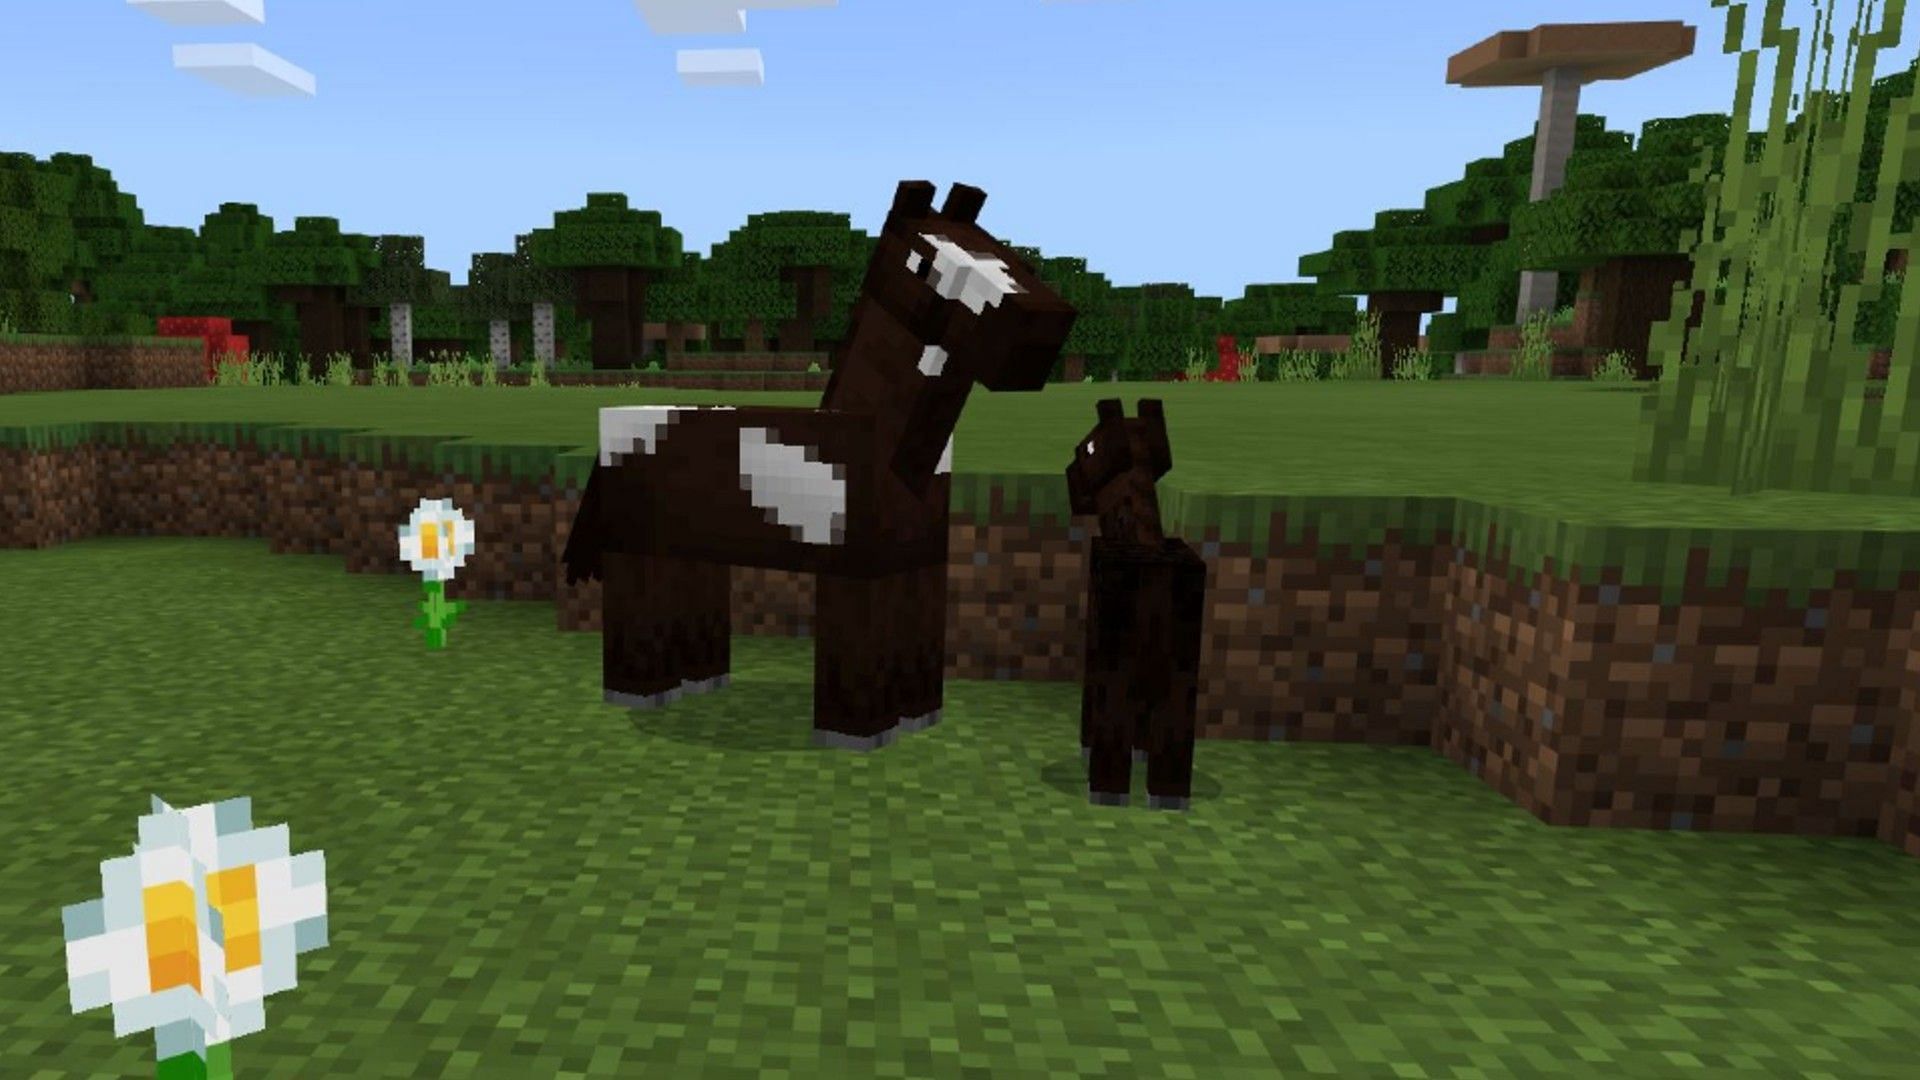 Horses are one of the mobs that can be tamed in Minecraft (image via Mojang)